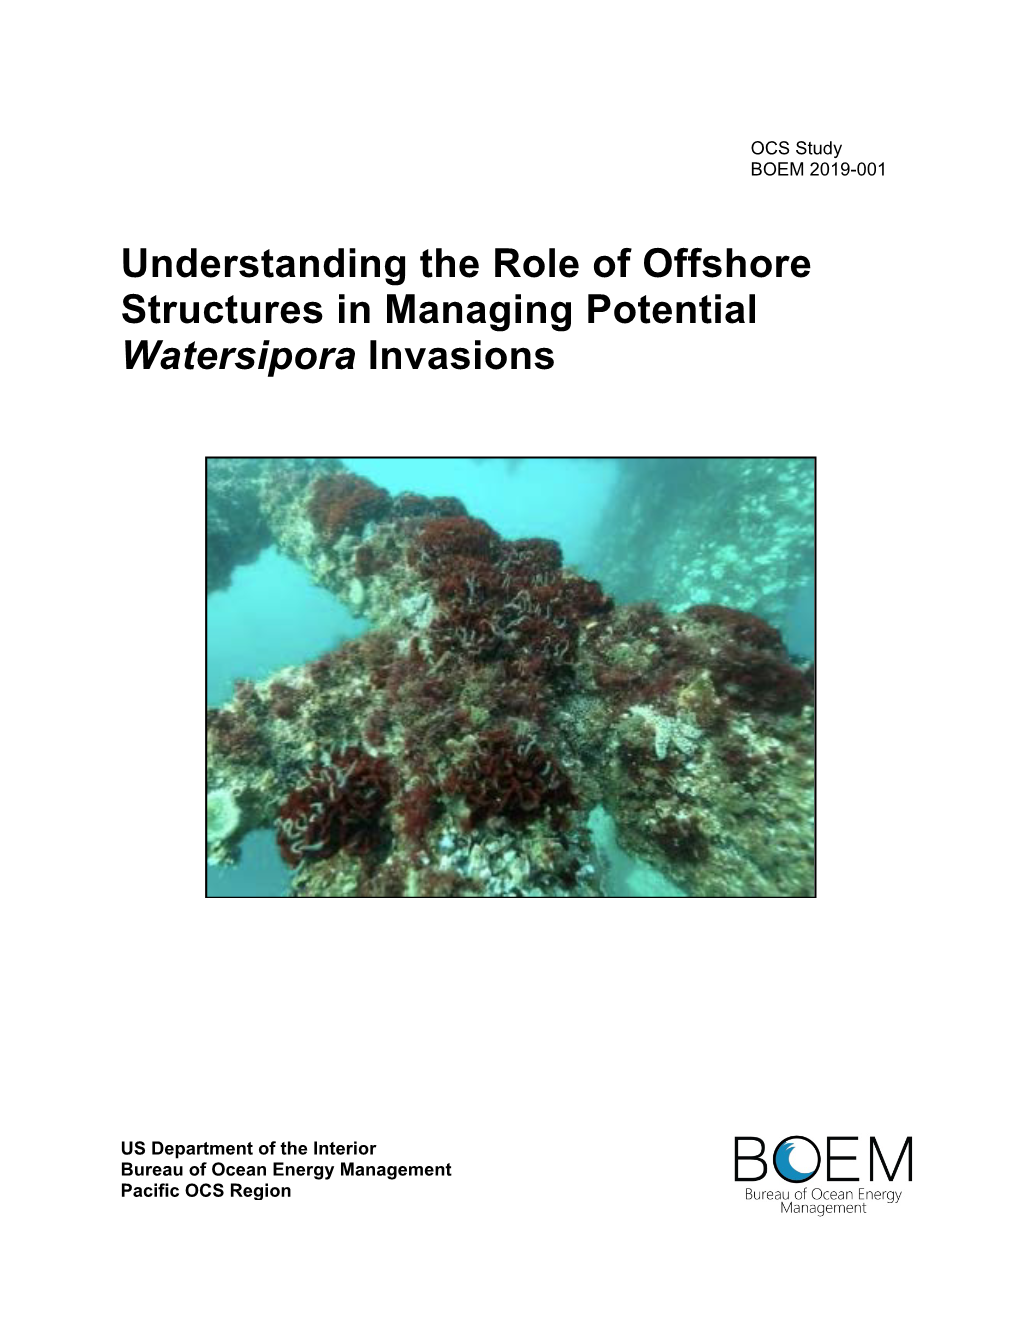 Understanding the Role of Offshore Structures in Managing Potential Watersipora Invasions